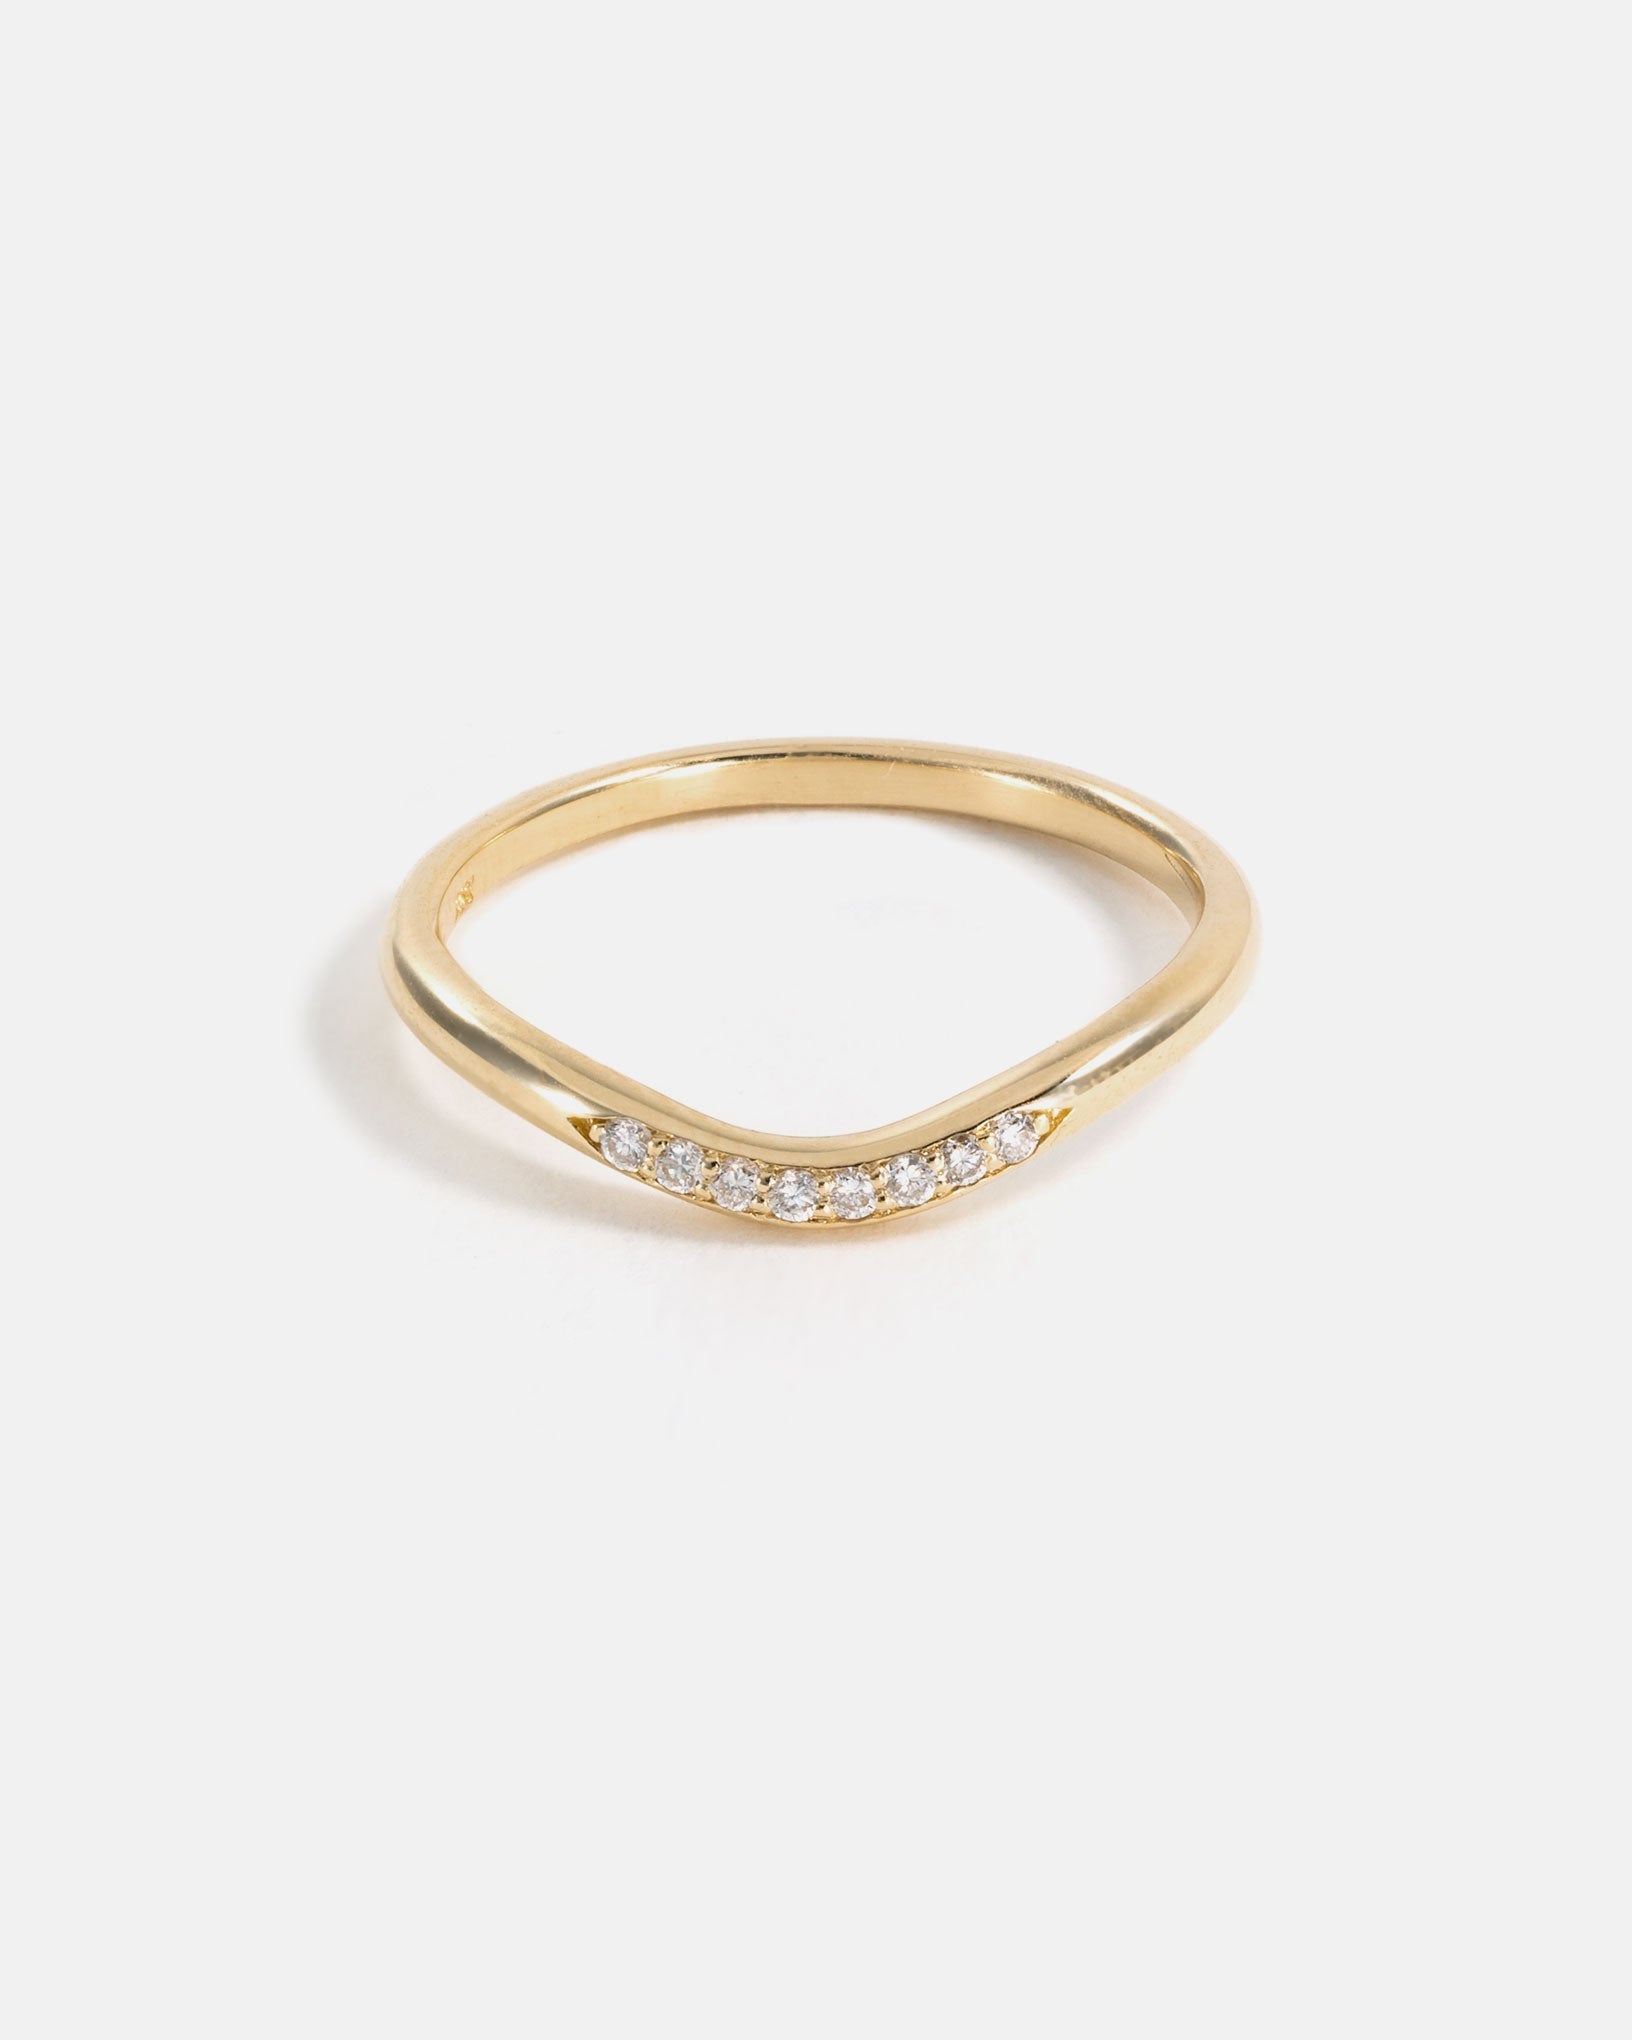 Stratura Wave Wedding Ring in 14k Gold with lab grown diamonds